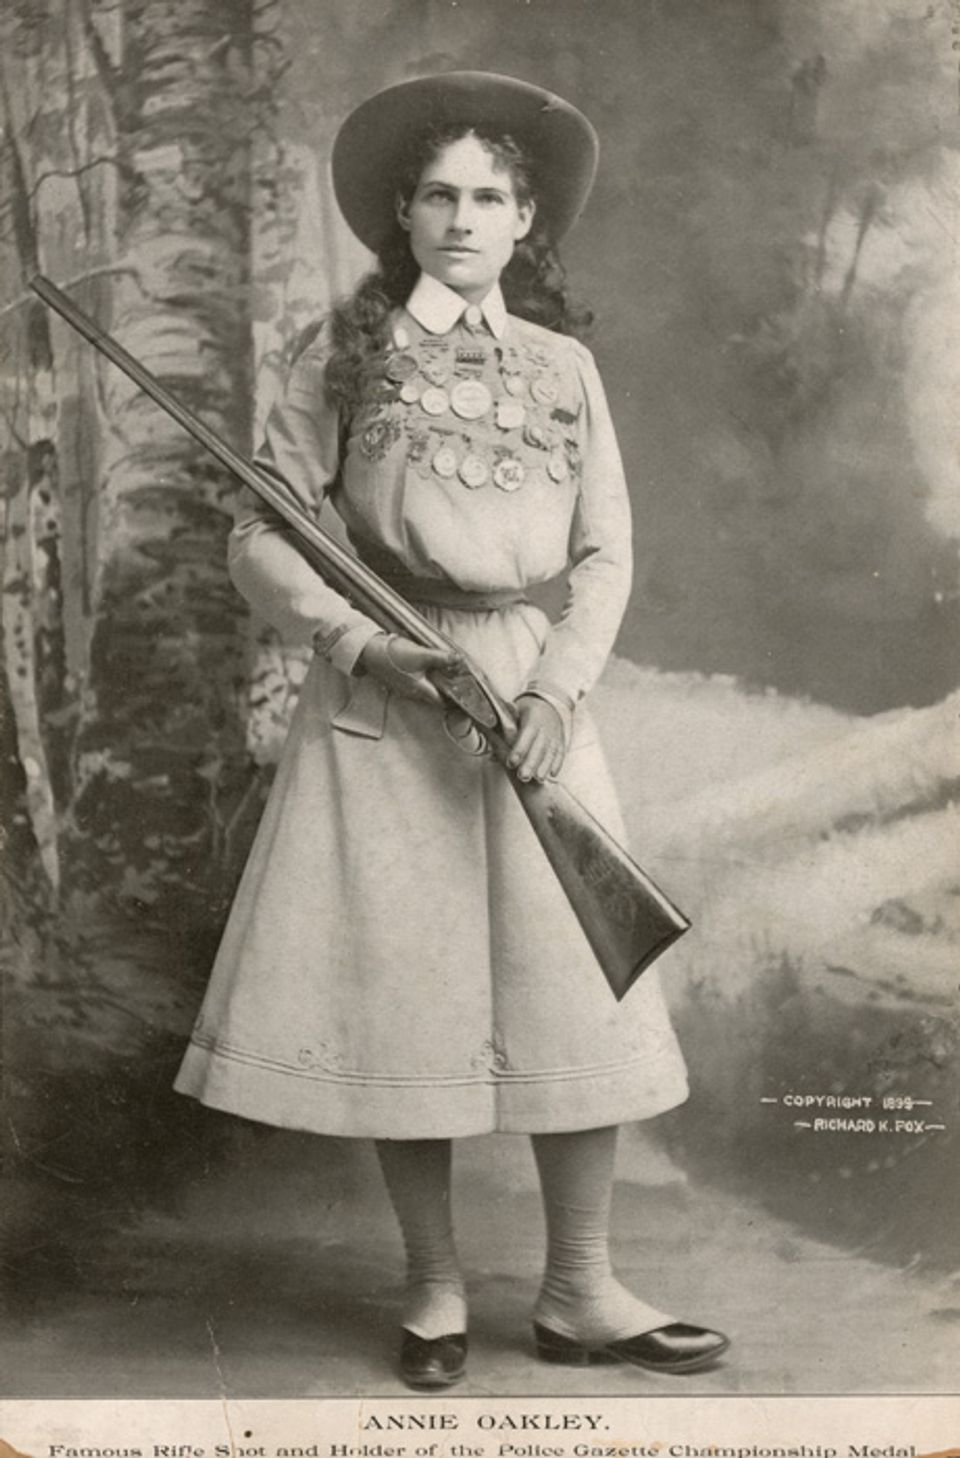 Fox's photomechanical print of Annie Oakley in a dress, hat, and carrying a shotgun.